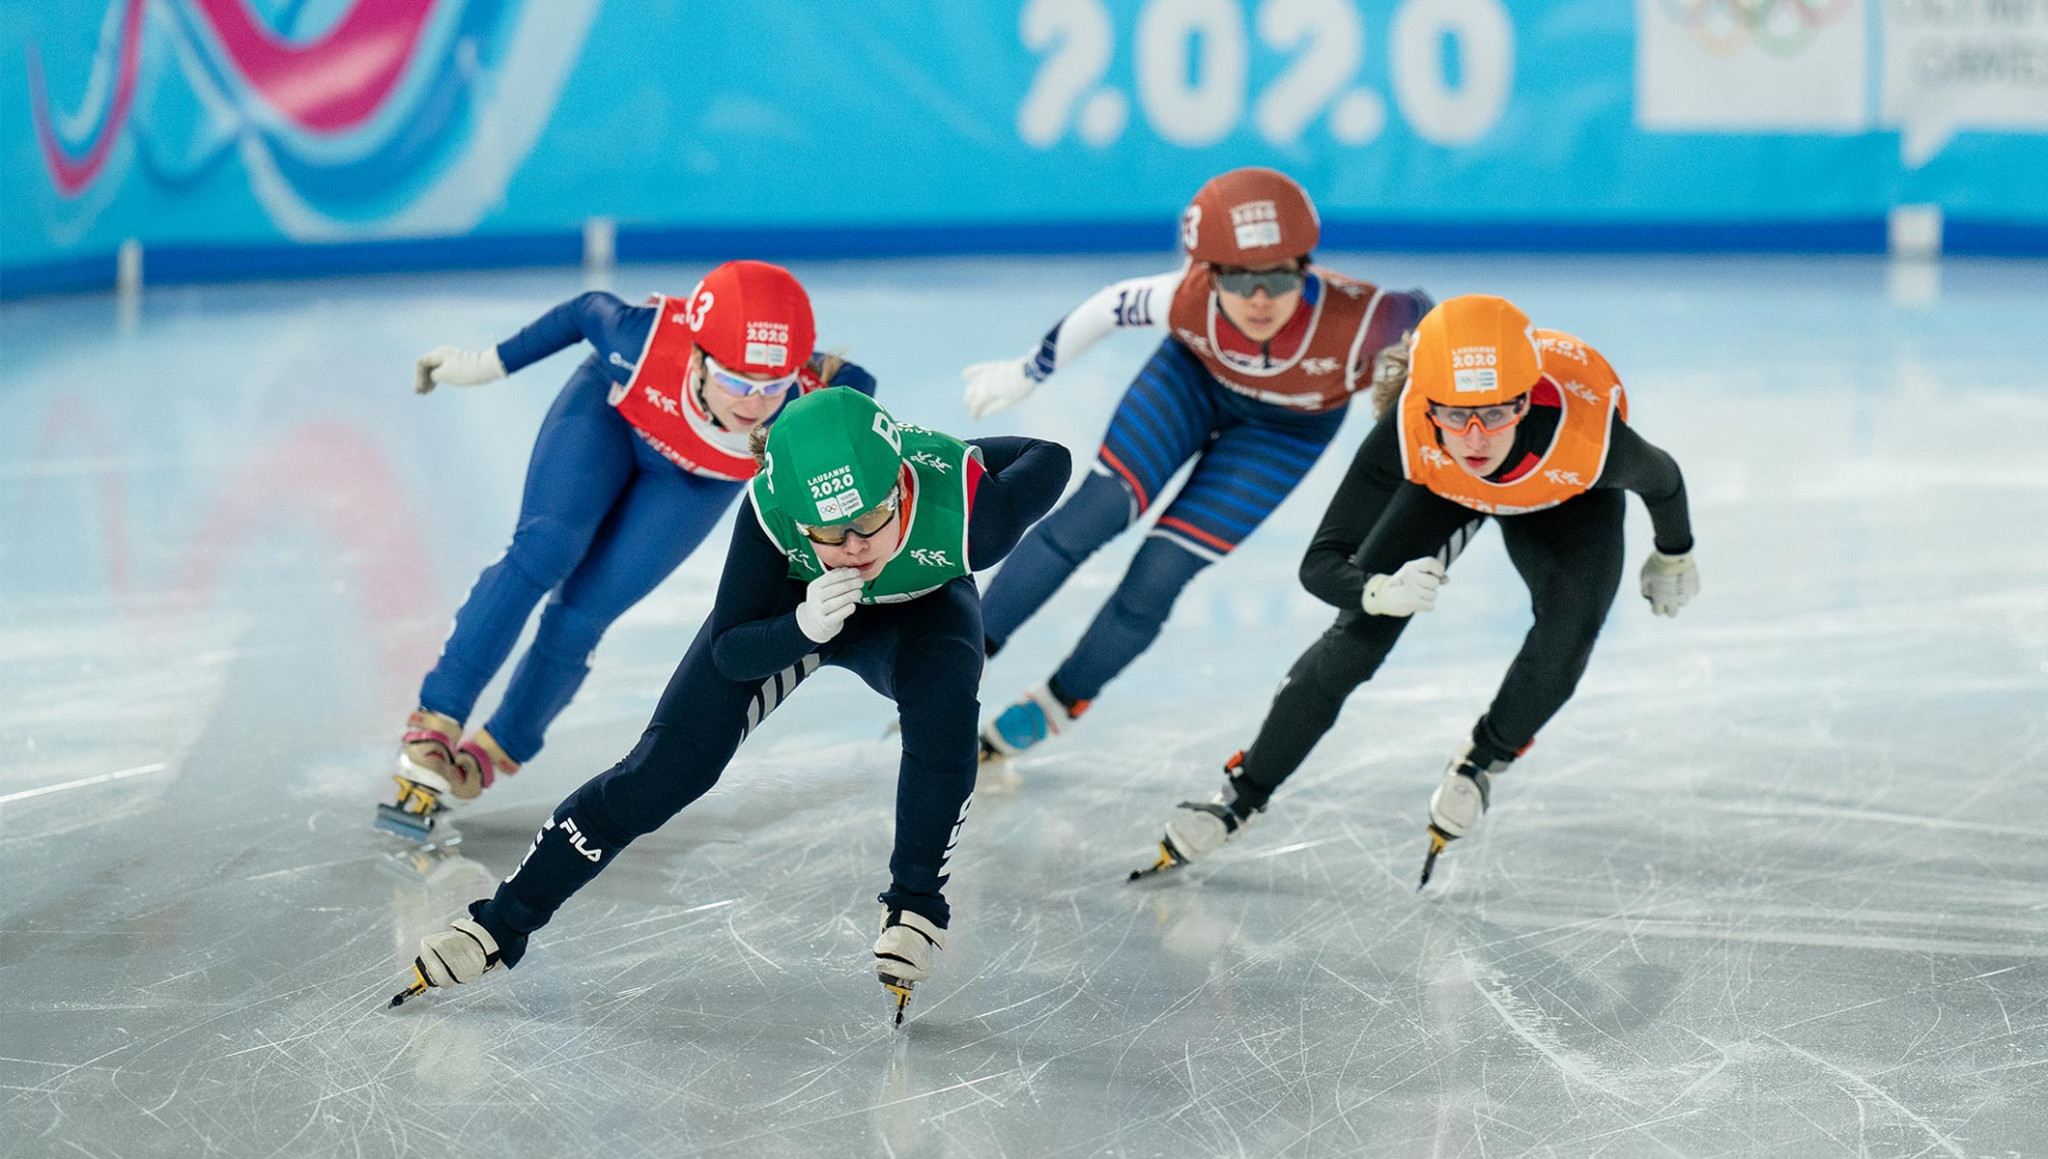 The mixed relay brought the short track speed skating programme at Lausanne 2020 to a close ©OIS